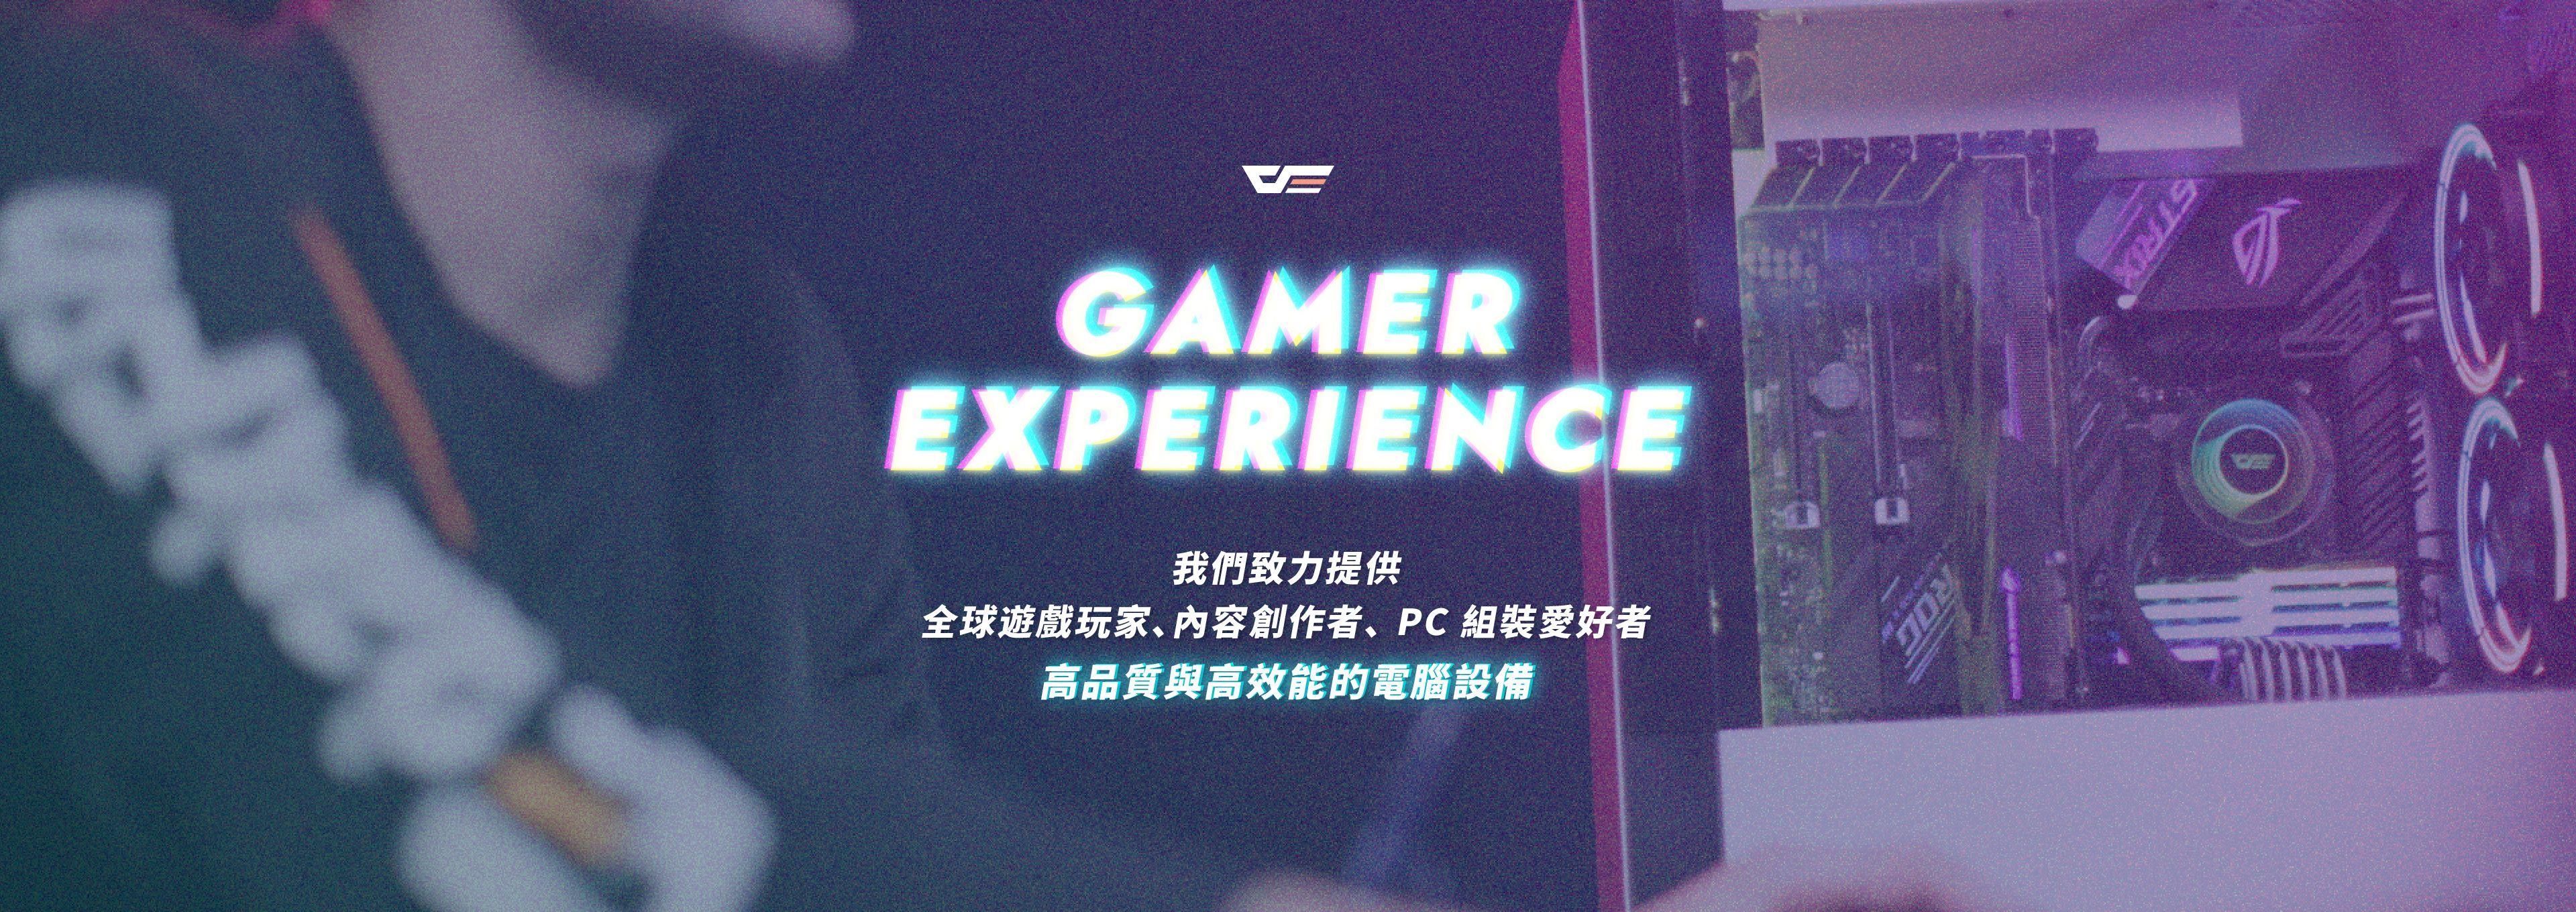 Gaming Experience